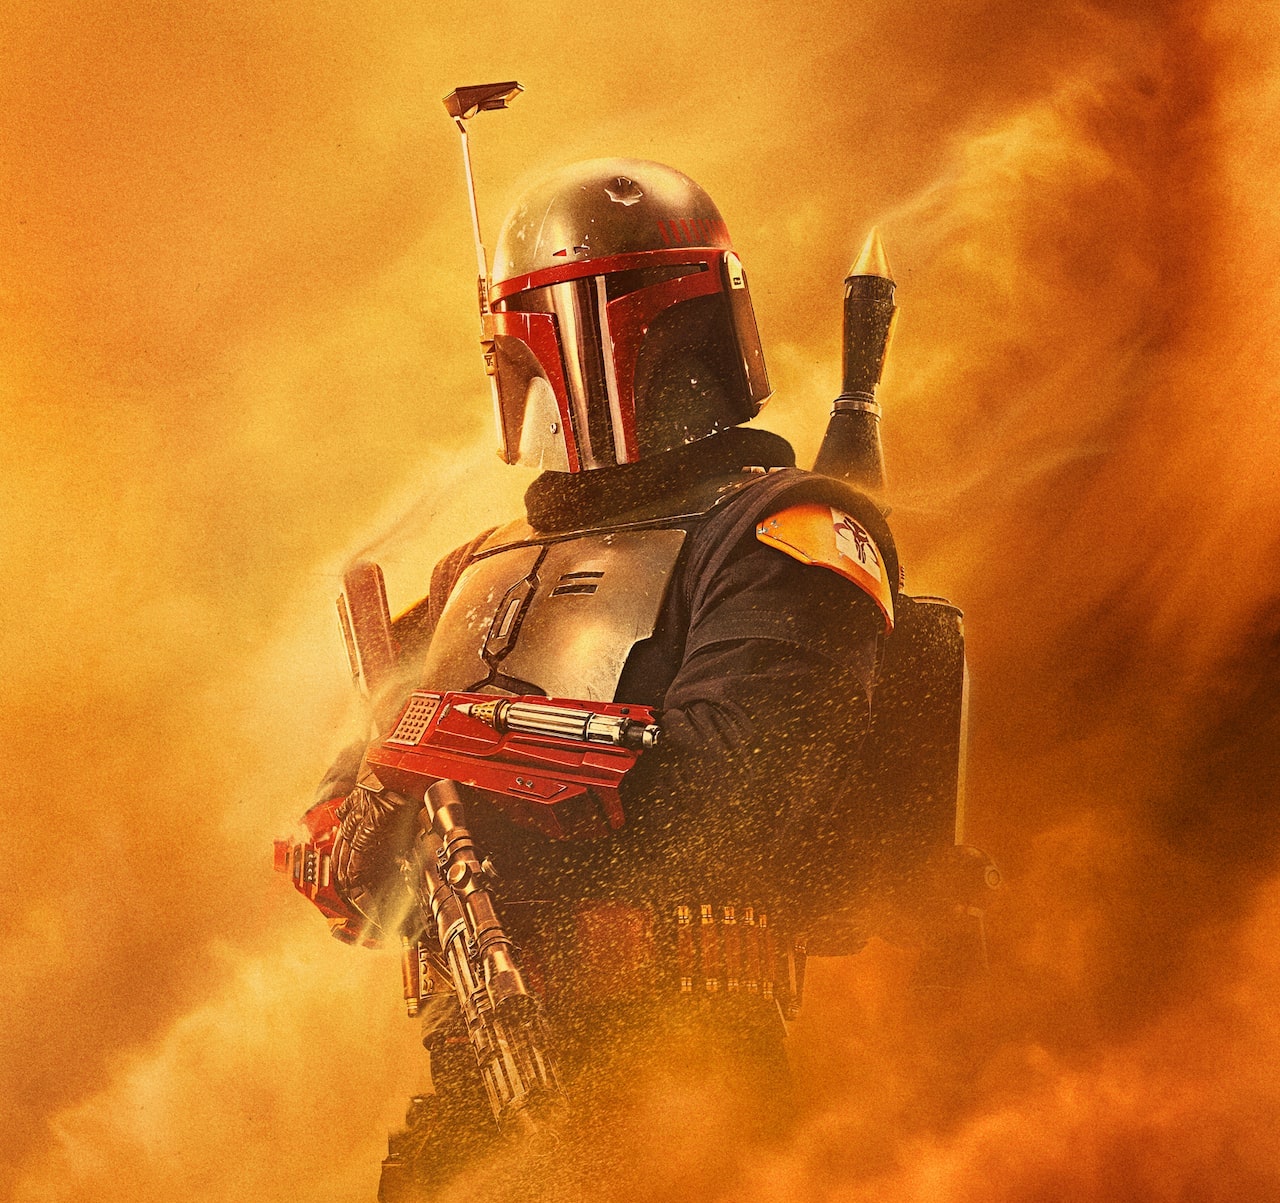 New 'The Book of Boba Fett' character posters and TV spot released